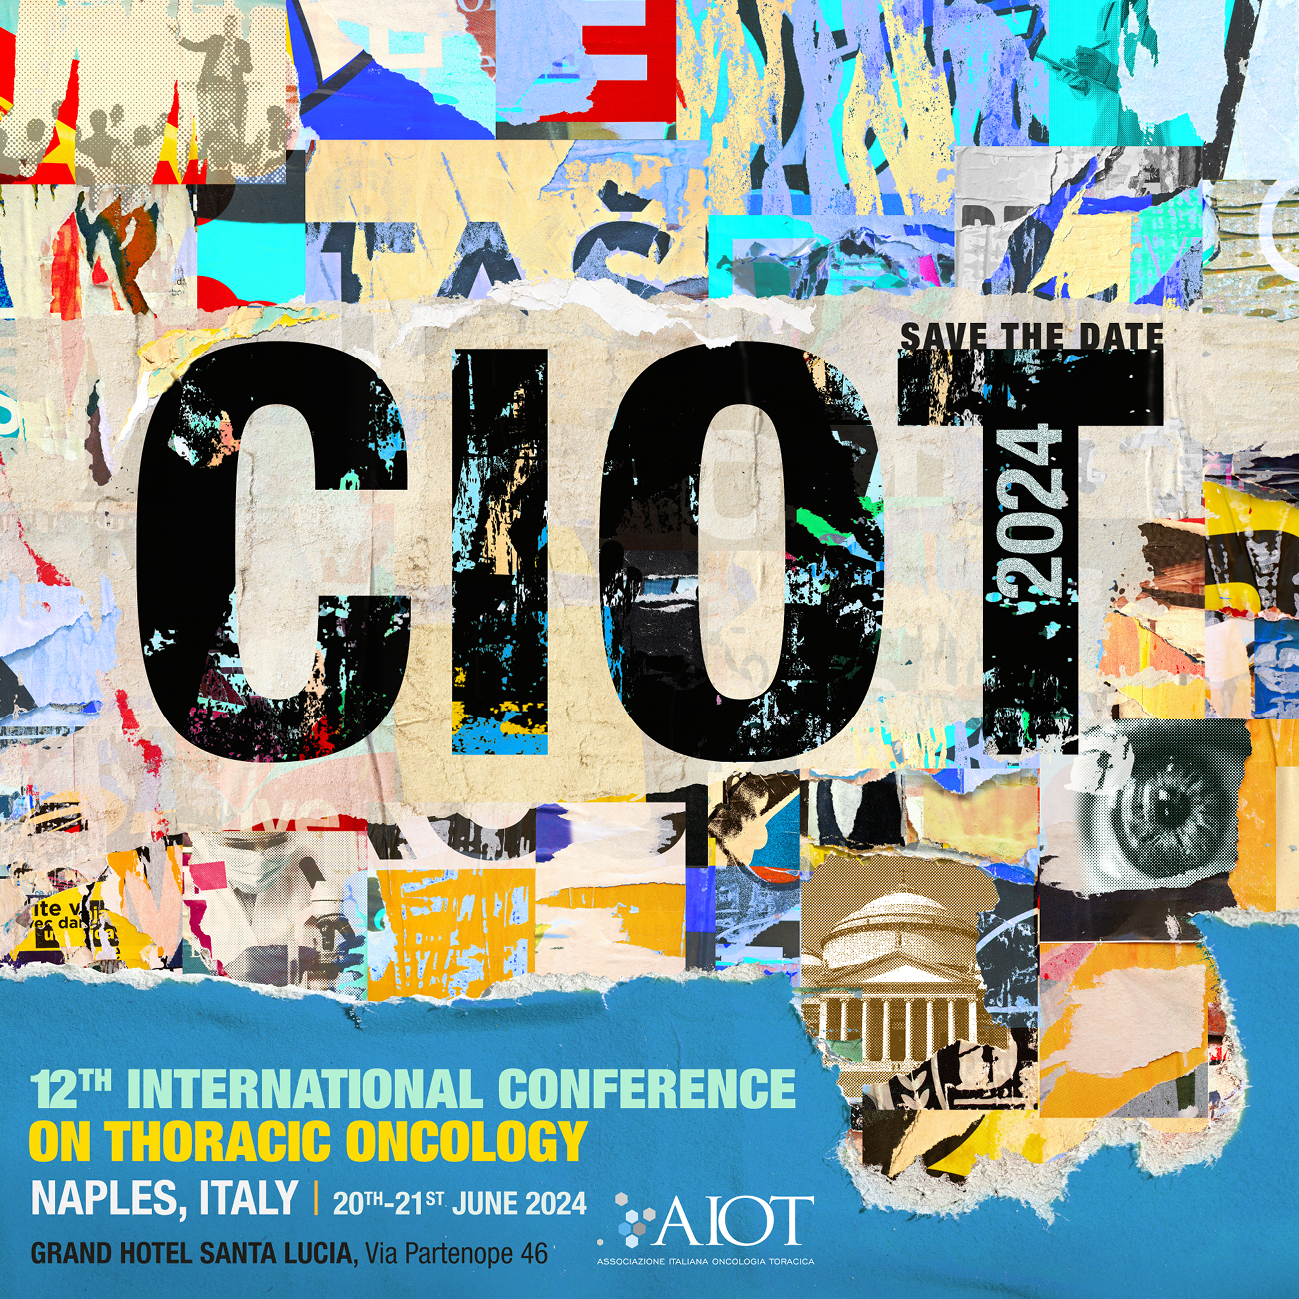 12th CIOT – International Conference on Thoracic Oncology